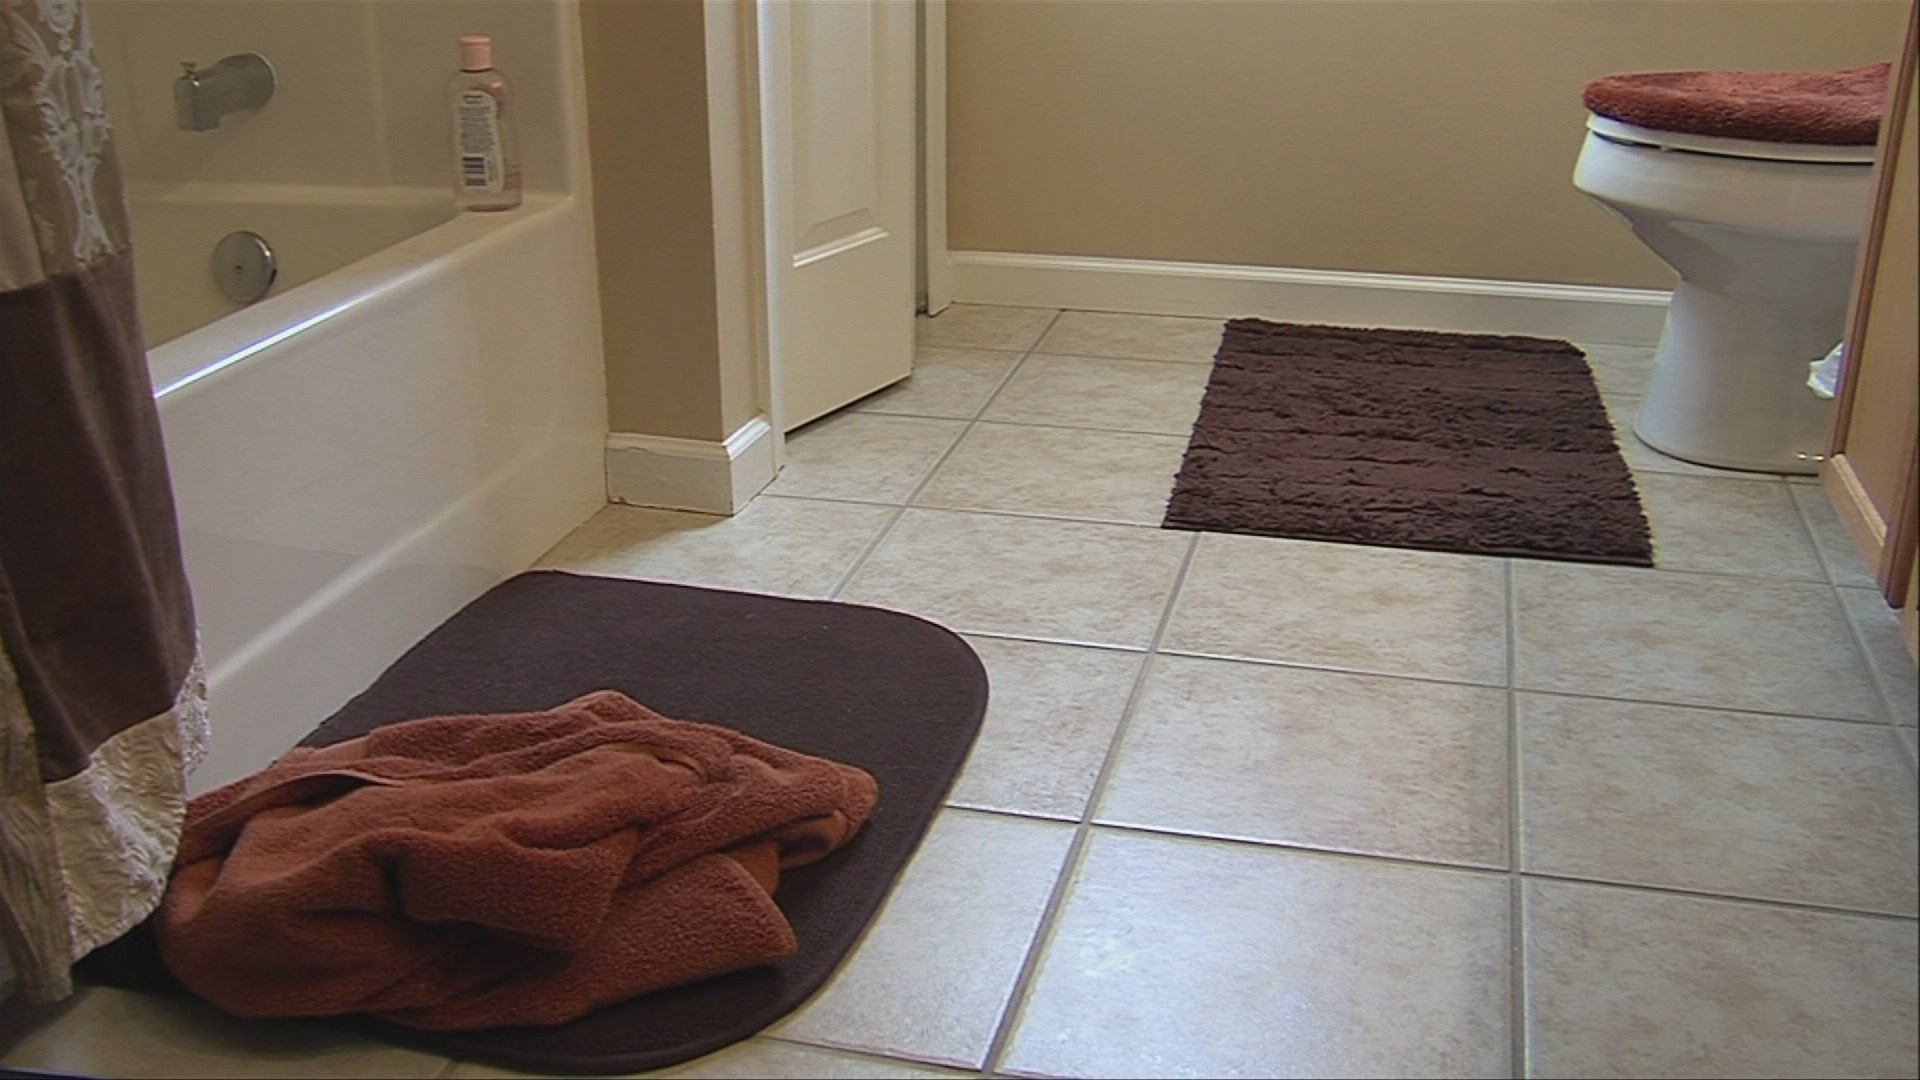 Did You Know Bath Mats Are Breeding Grounds for Bacteria and Fungi